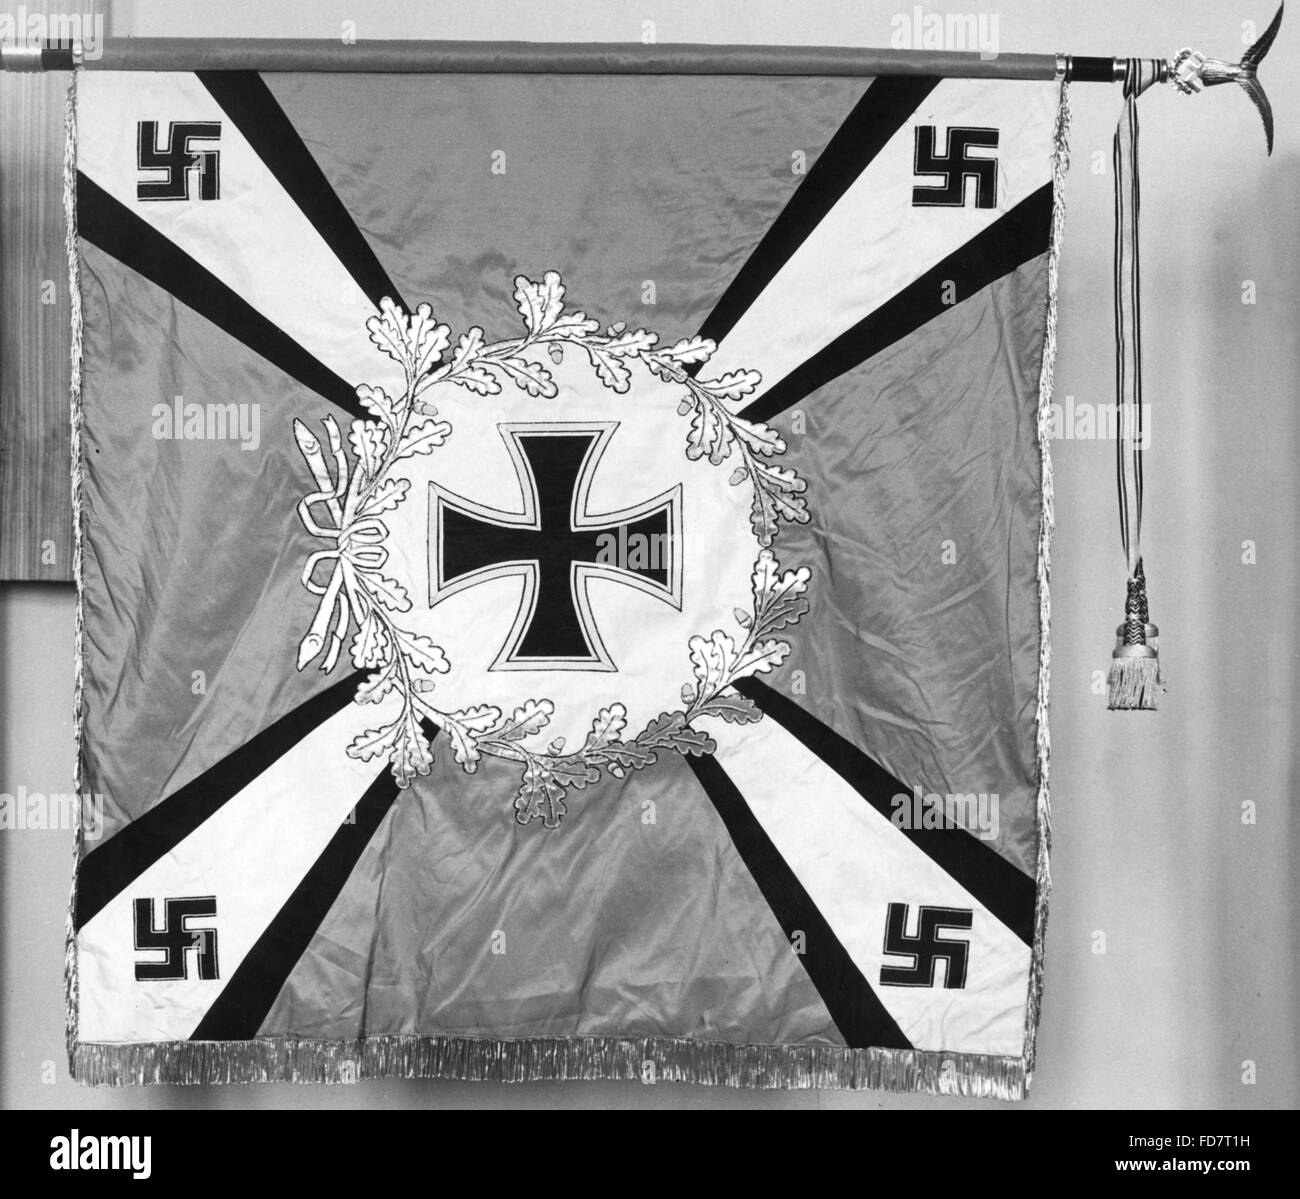 New troop flag for the Luftwaffe, 1936 Stock Photo